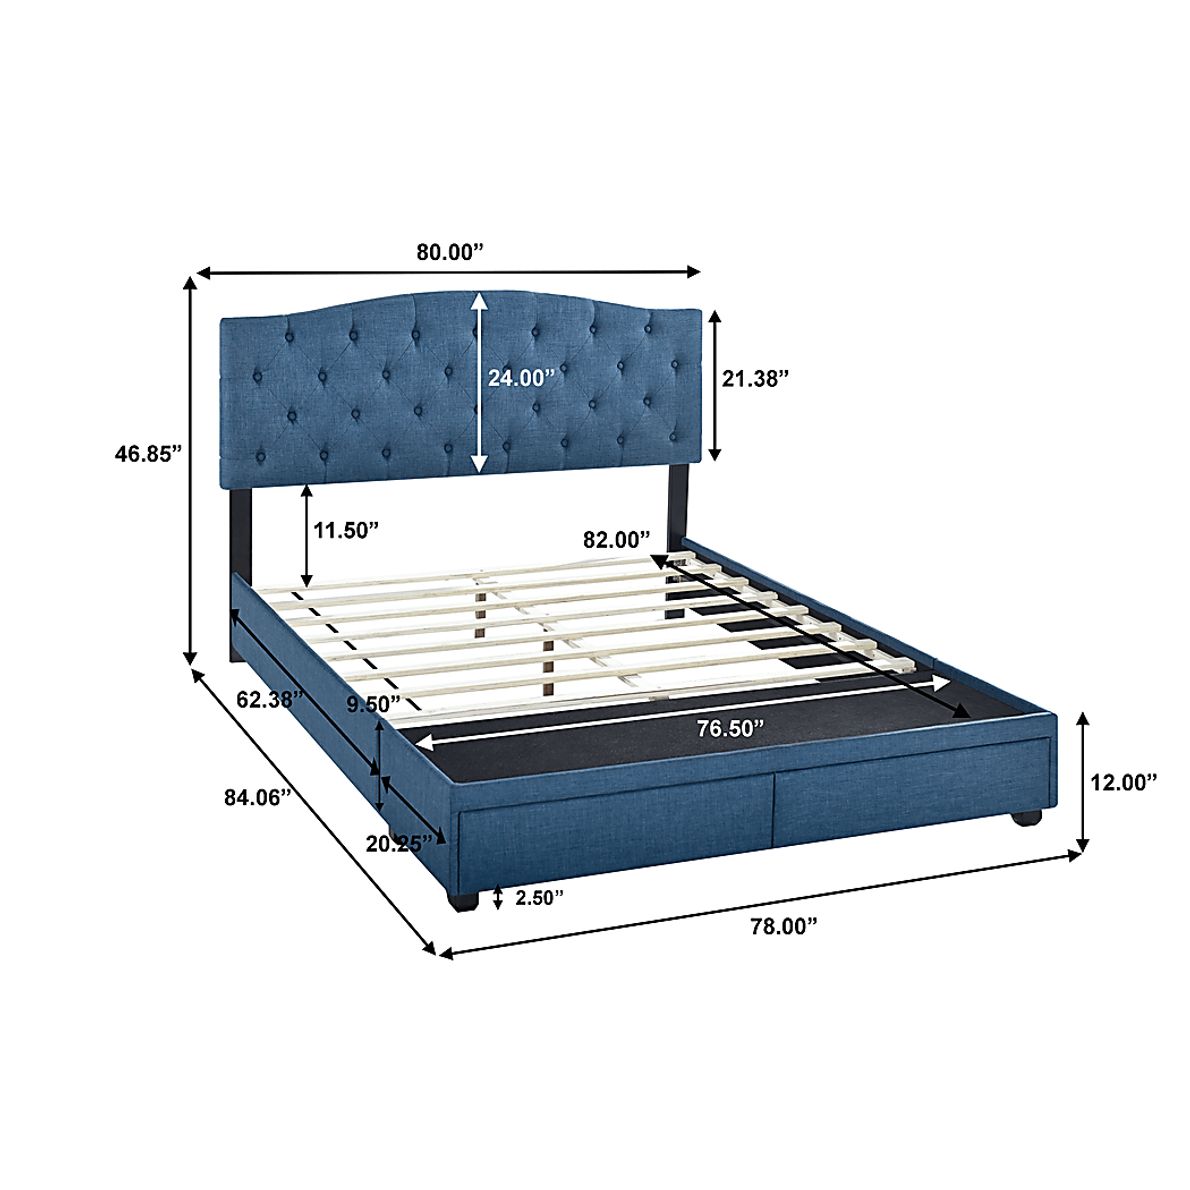 Chatwood Blue King Bed